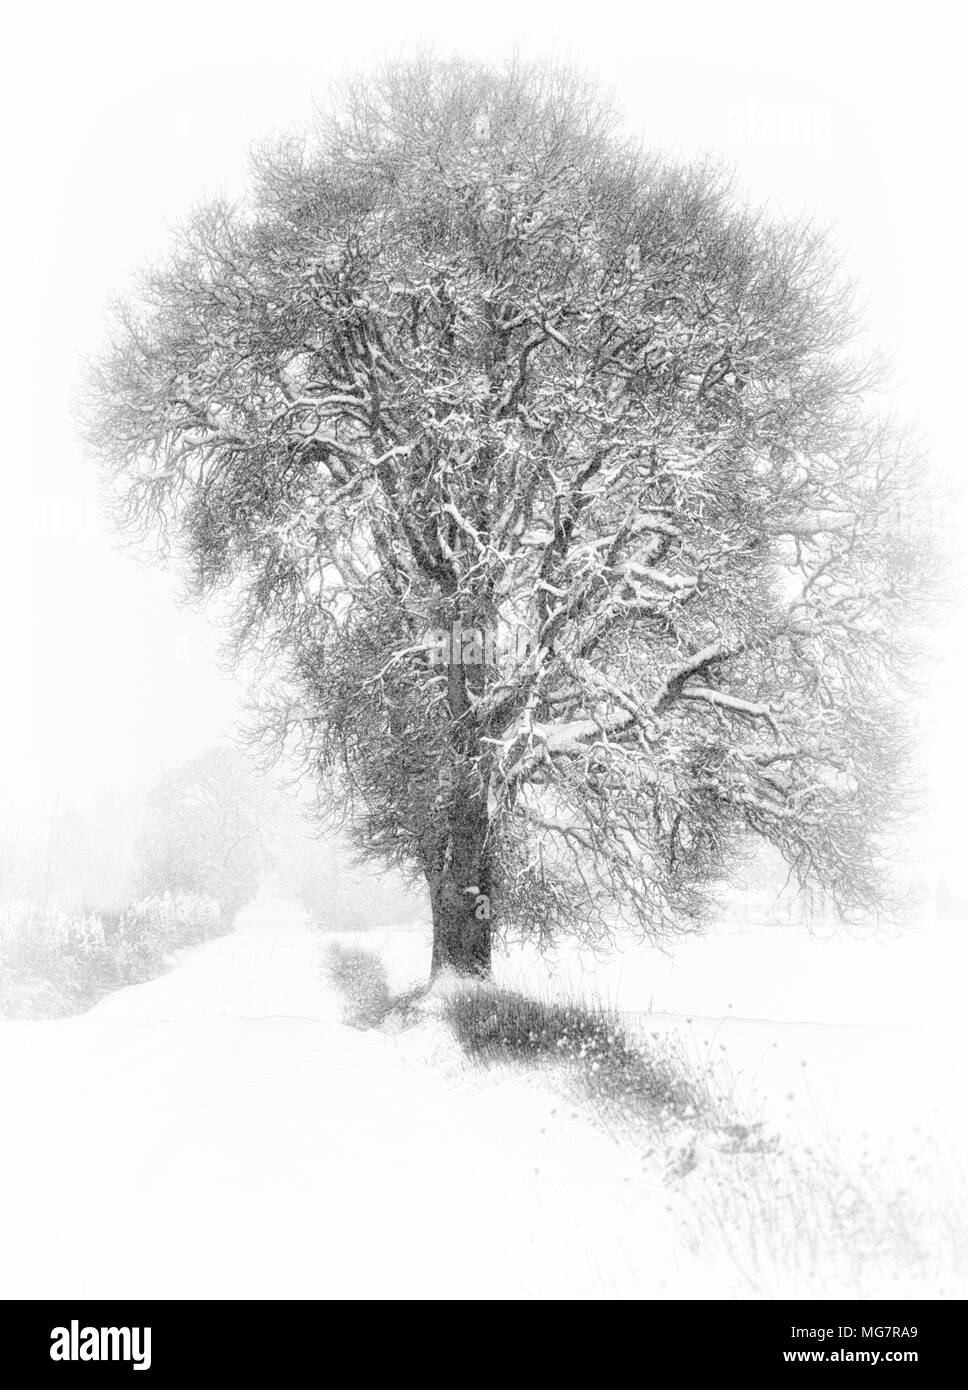 Falling snow covers this country road with a lone white oak tree on it's border. Stock Photo